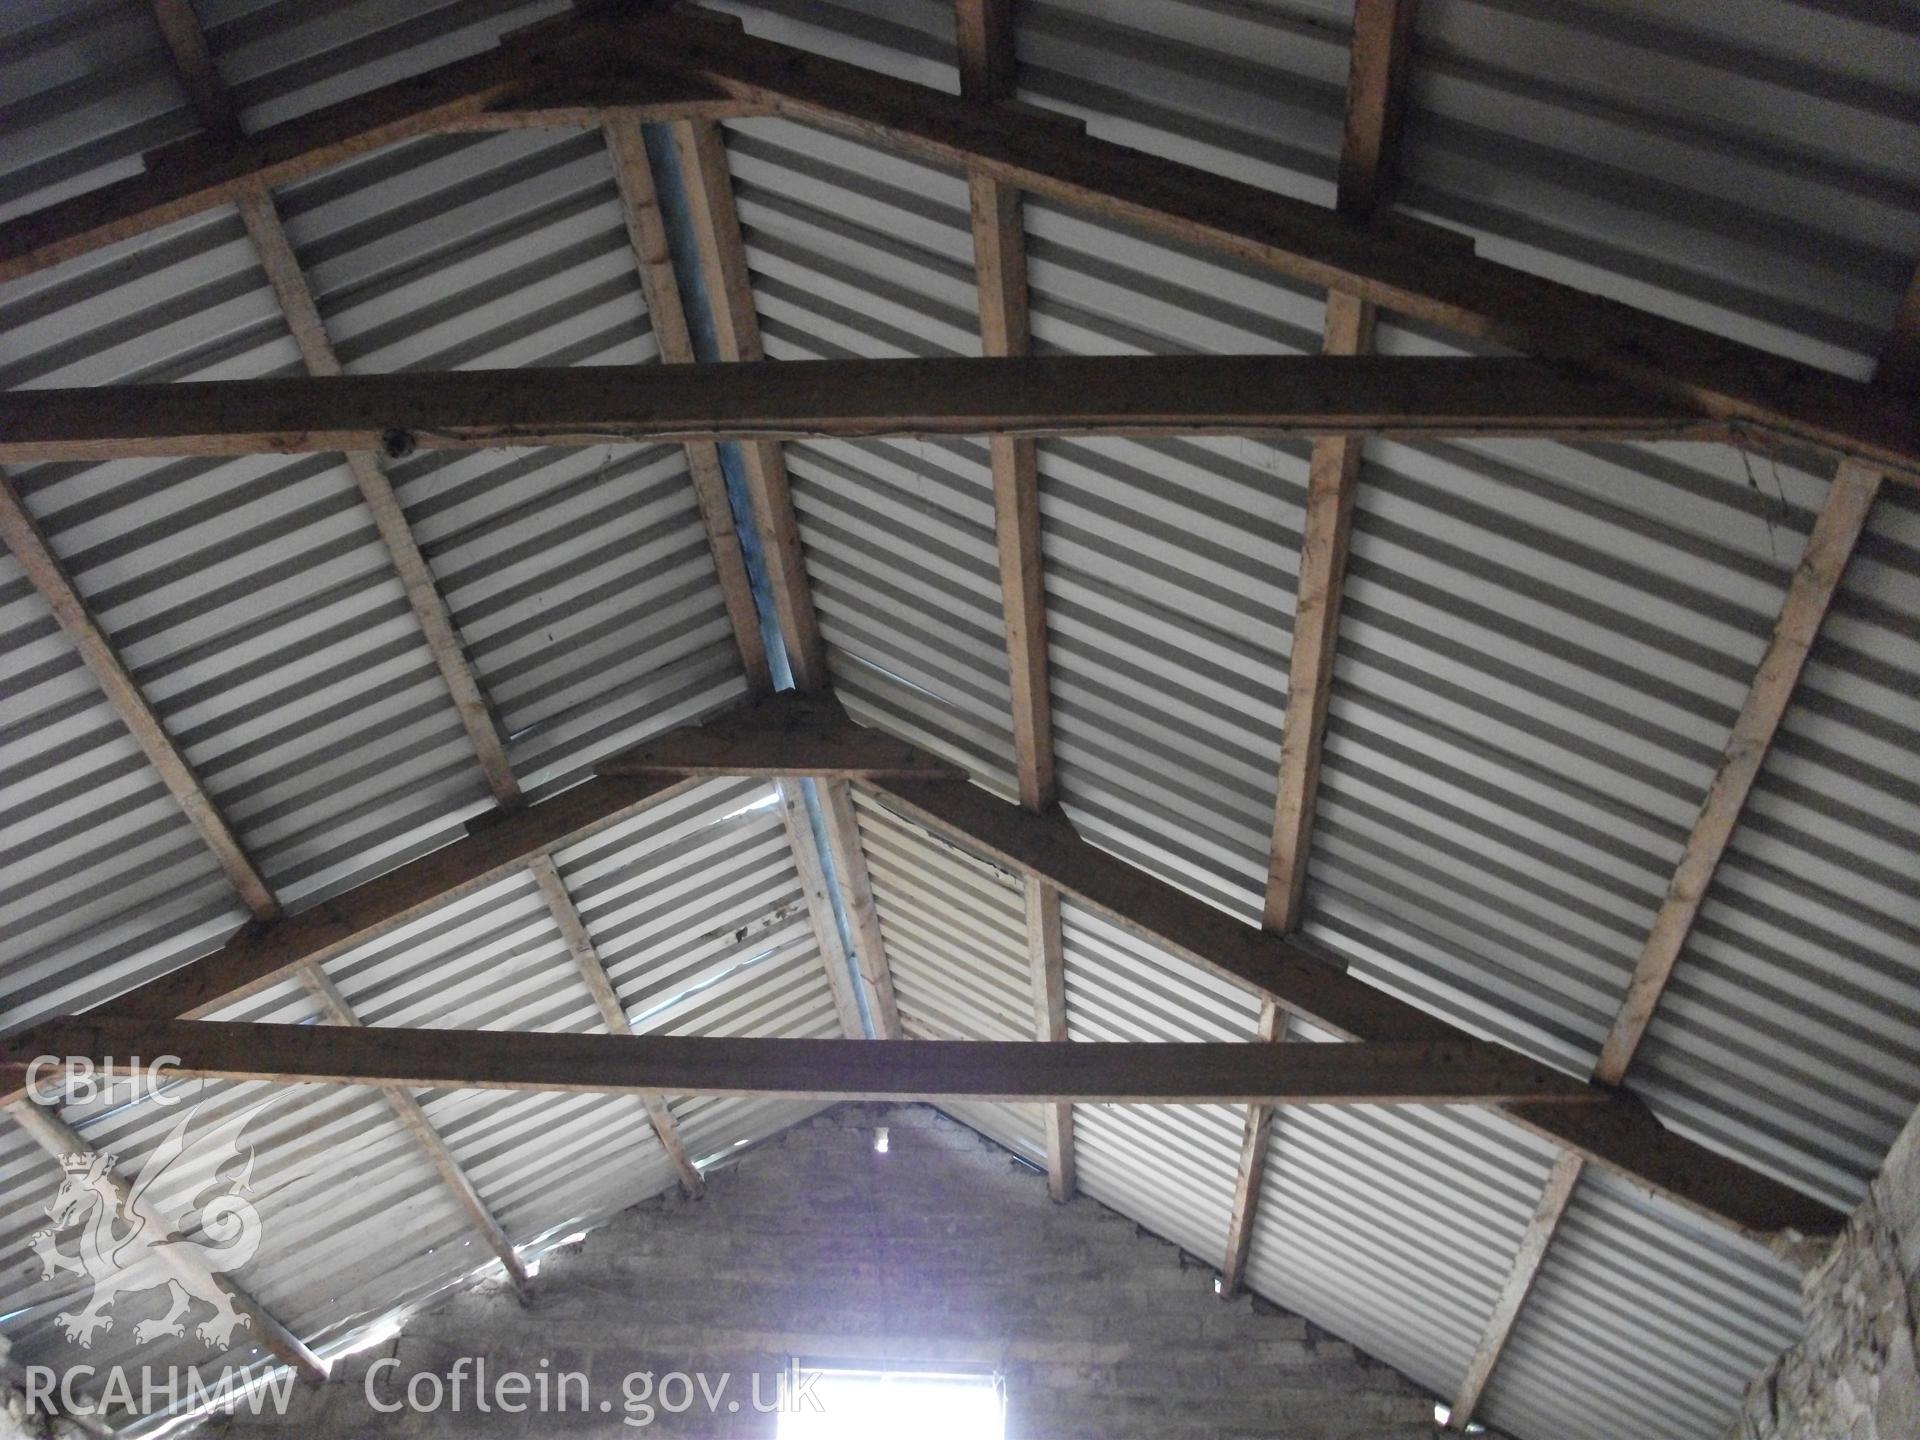 Colour digital photograph of interior of barn (metal roof) at Llangwm Isaf Farm, received in the course of Emergency Recording case ref no RCS2/1/1599.